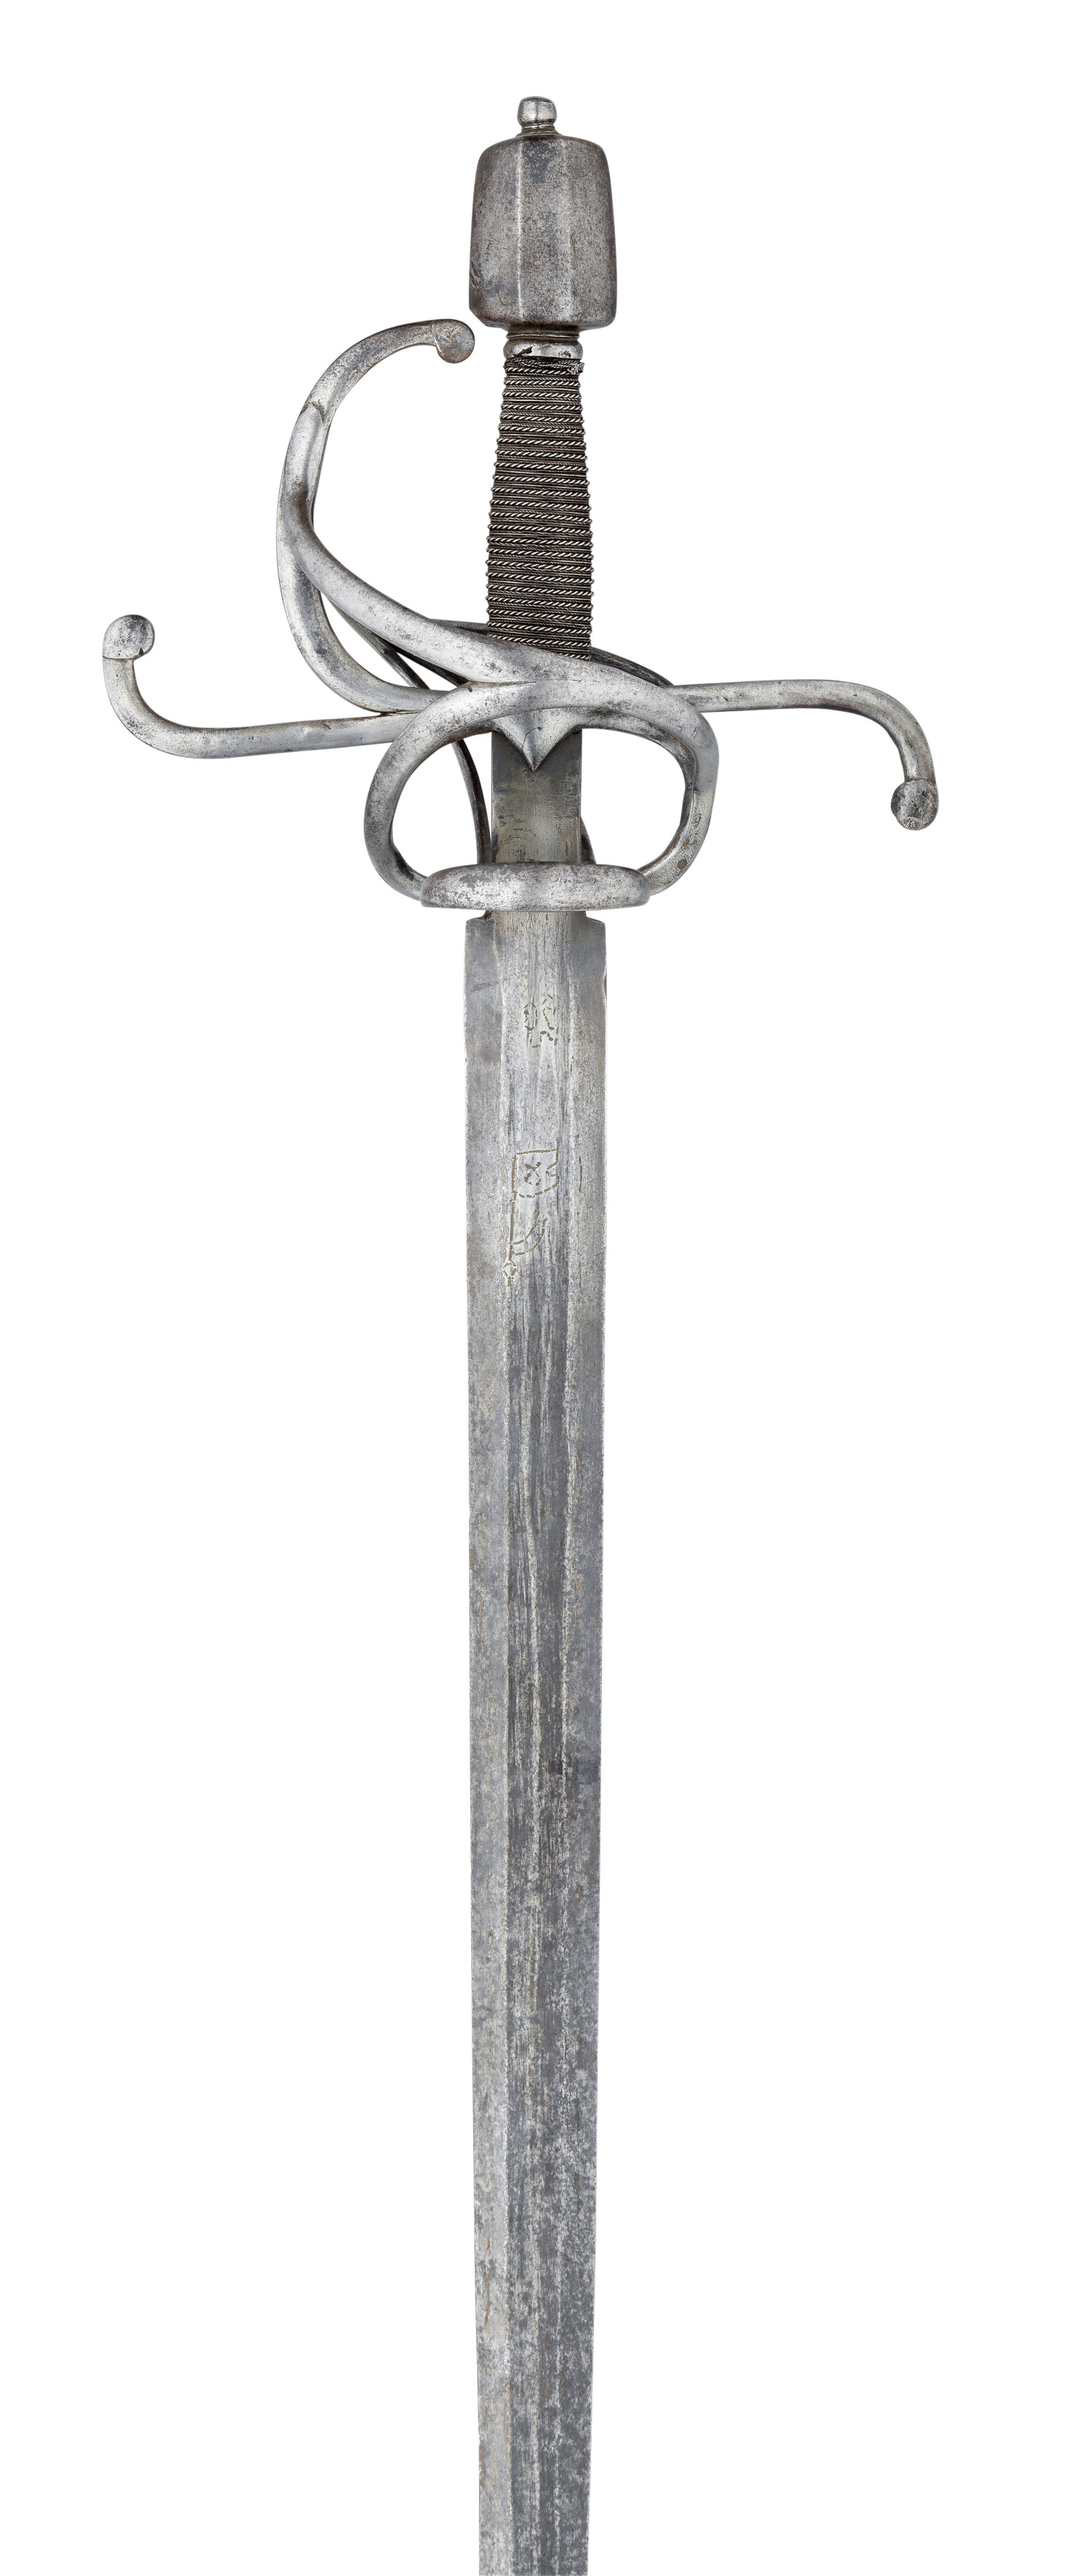 ‡Ⓦ A RAPIER IN SOUTH GERMAN EARLY 17TH CENTURY STYLE^ 19TH CENTURY